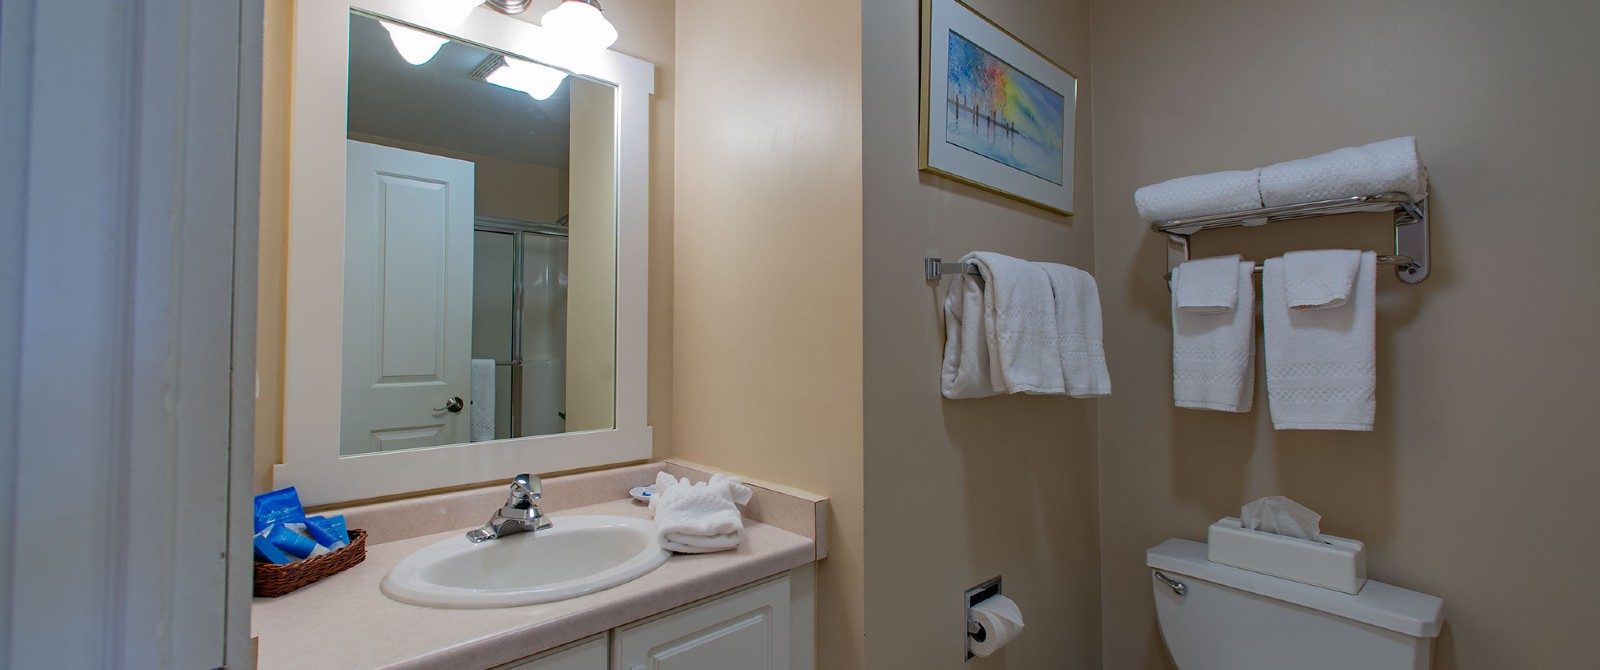 Bathroom with tan walls, sink with large white framed mirror and racks with white folded towels